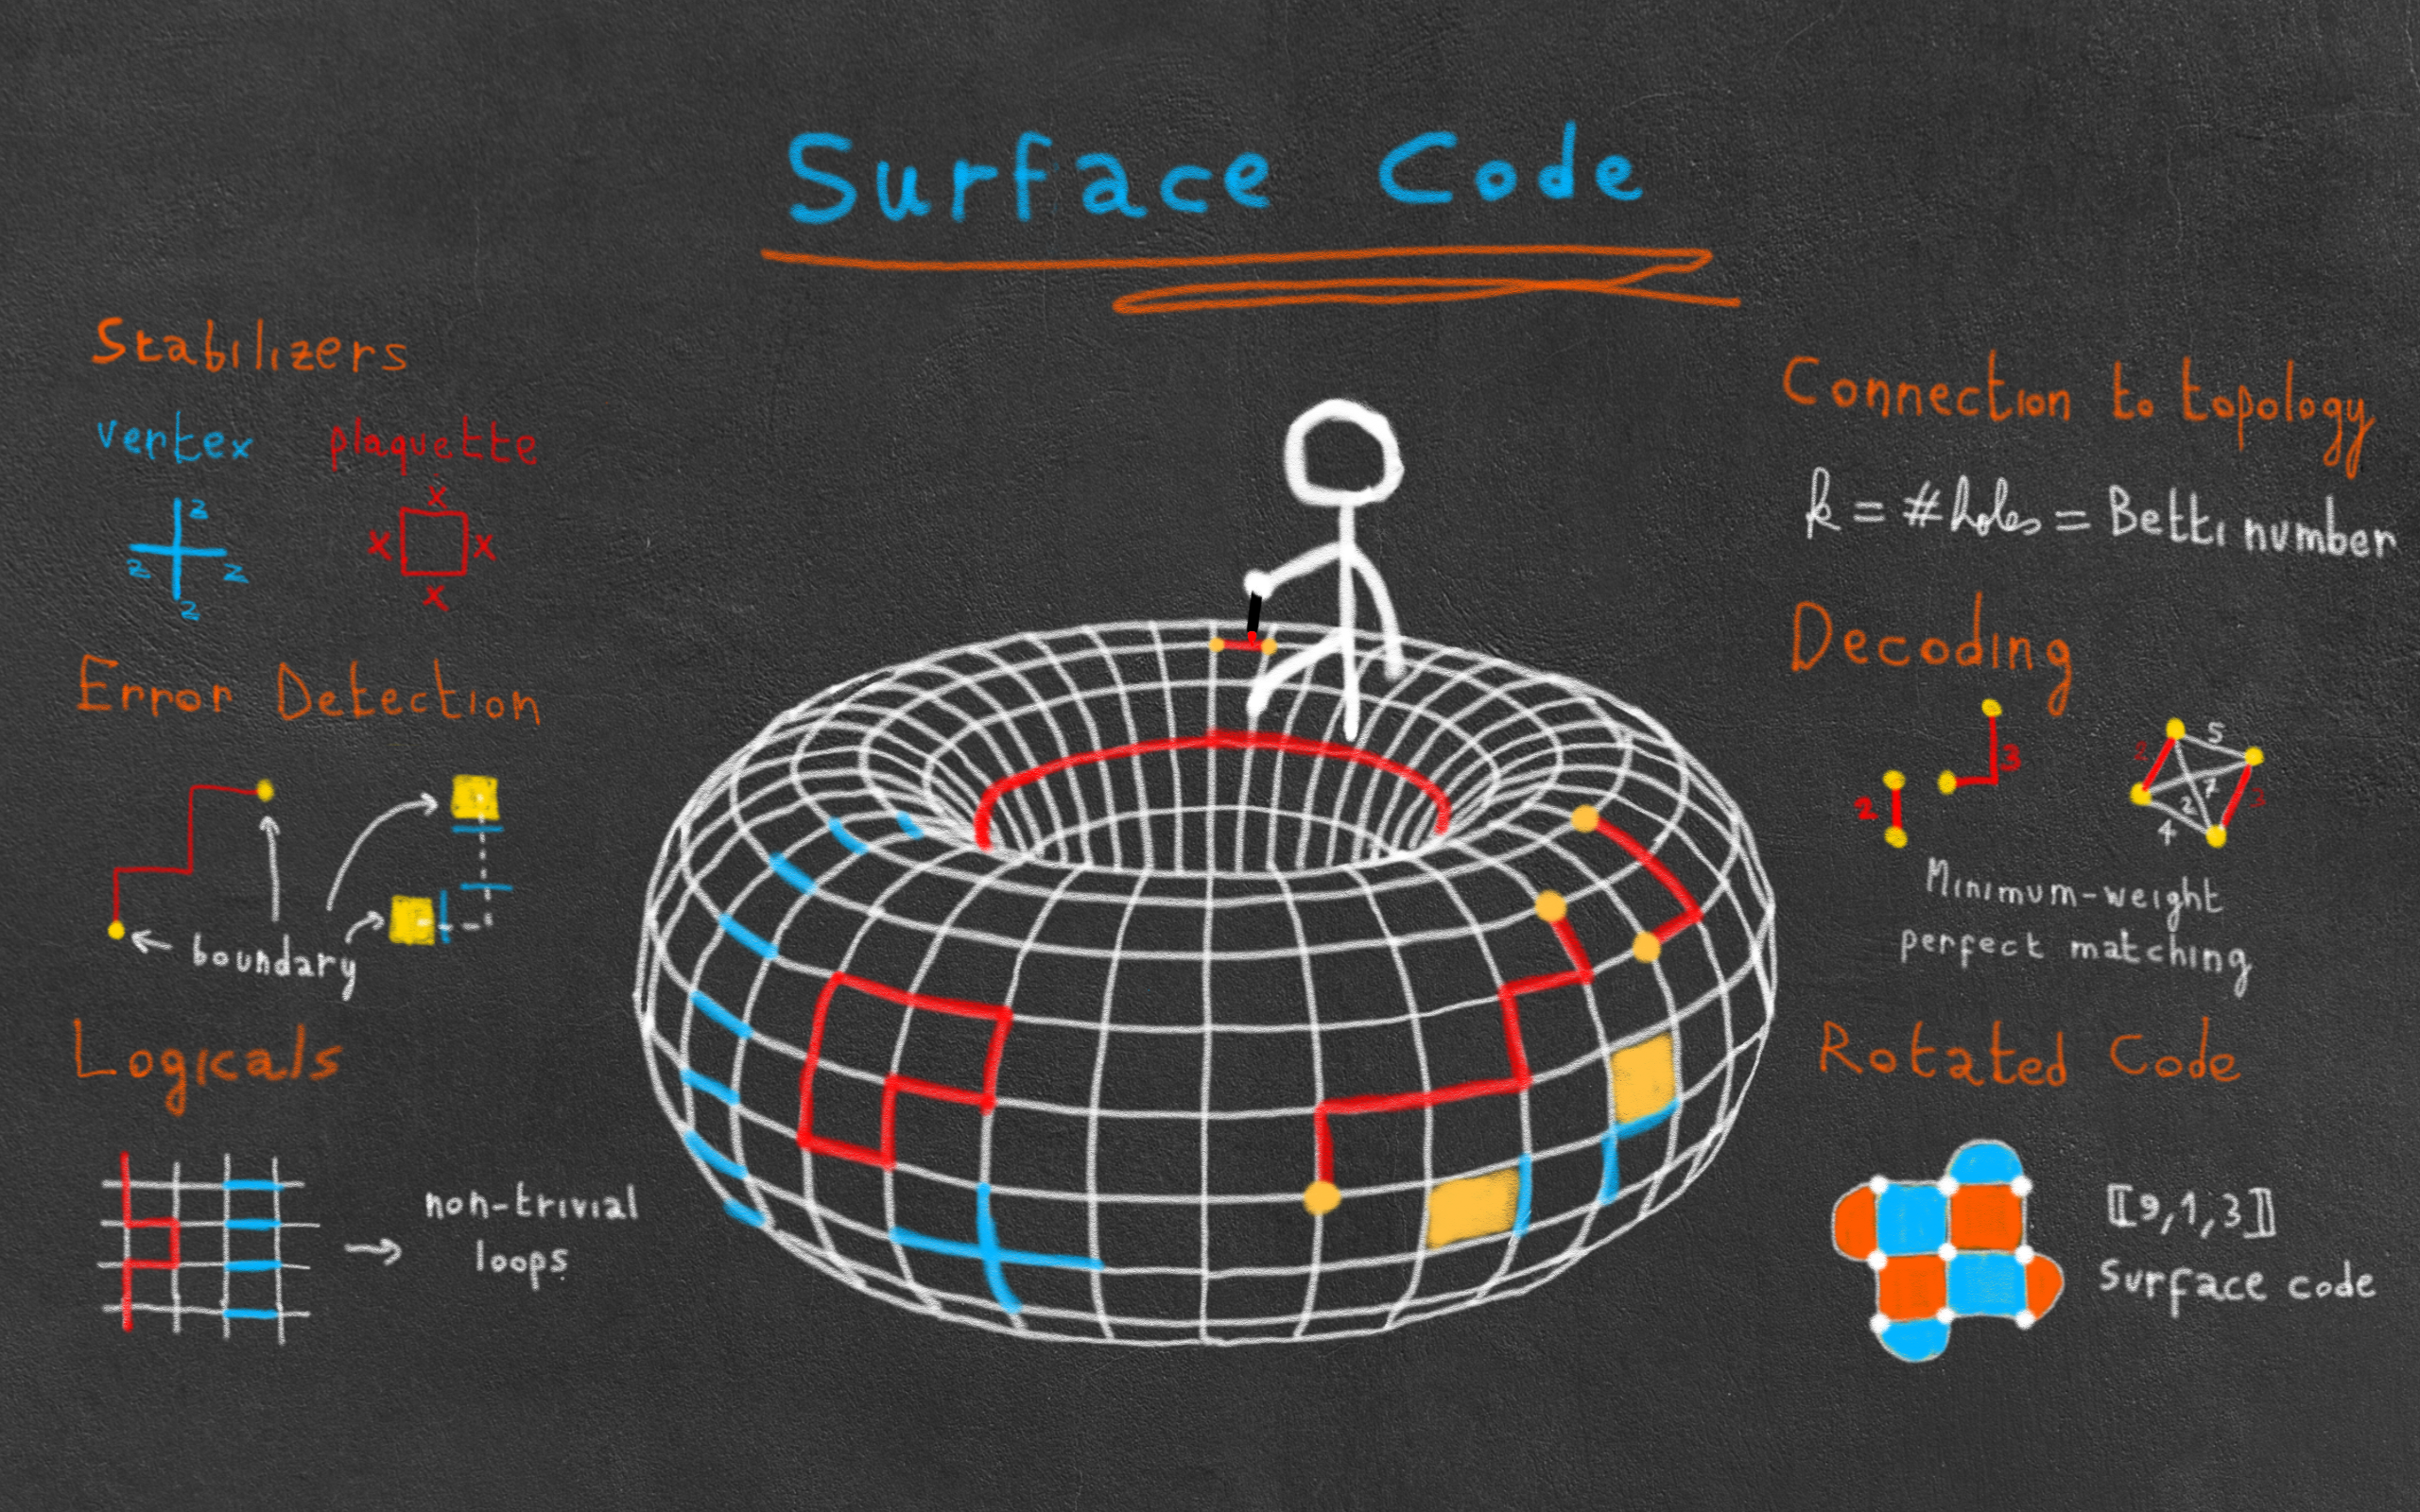 An interactive introduction to the surface code